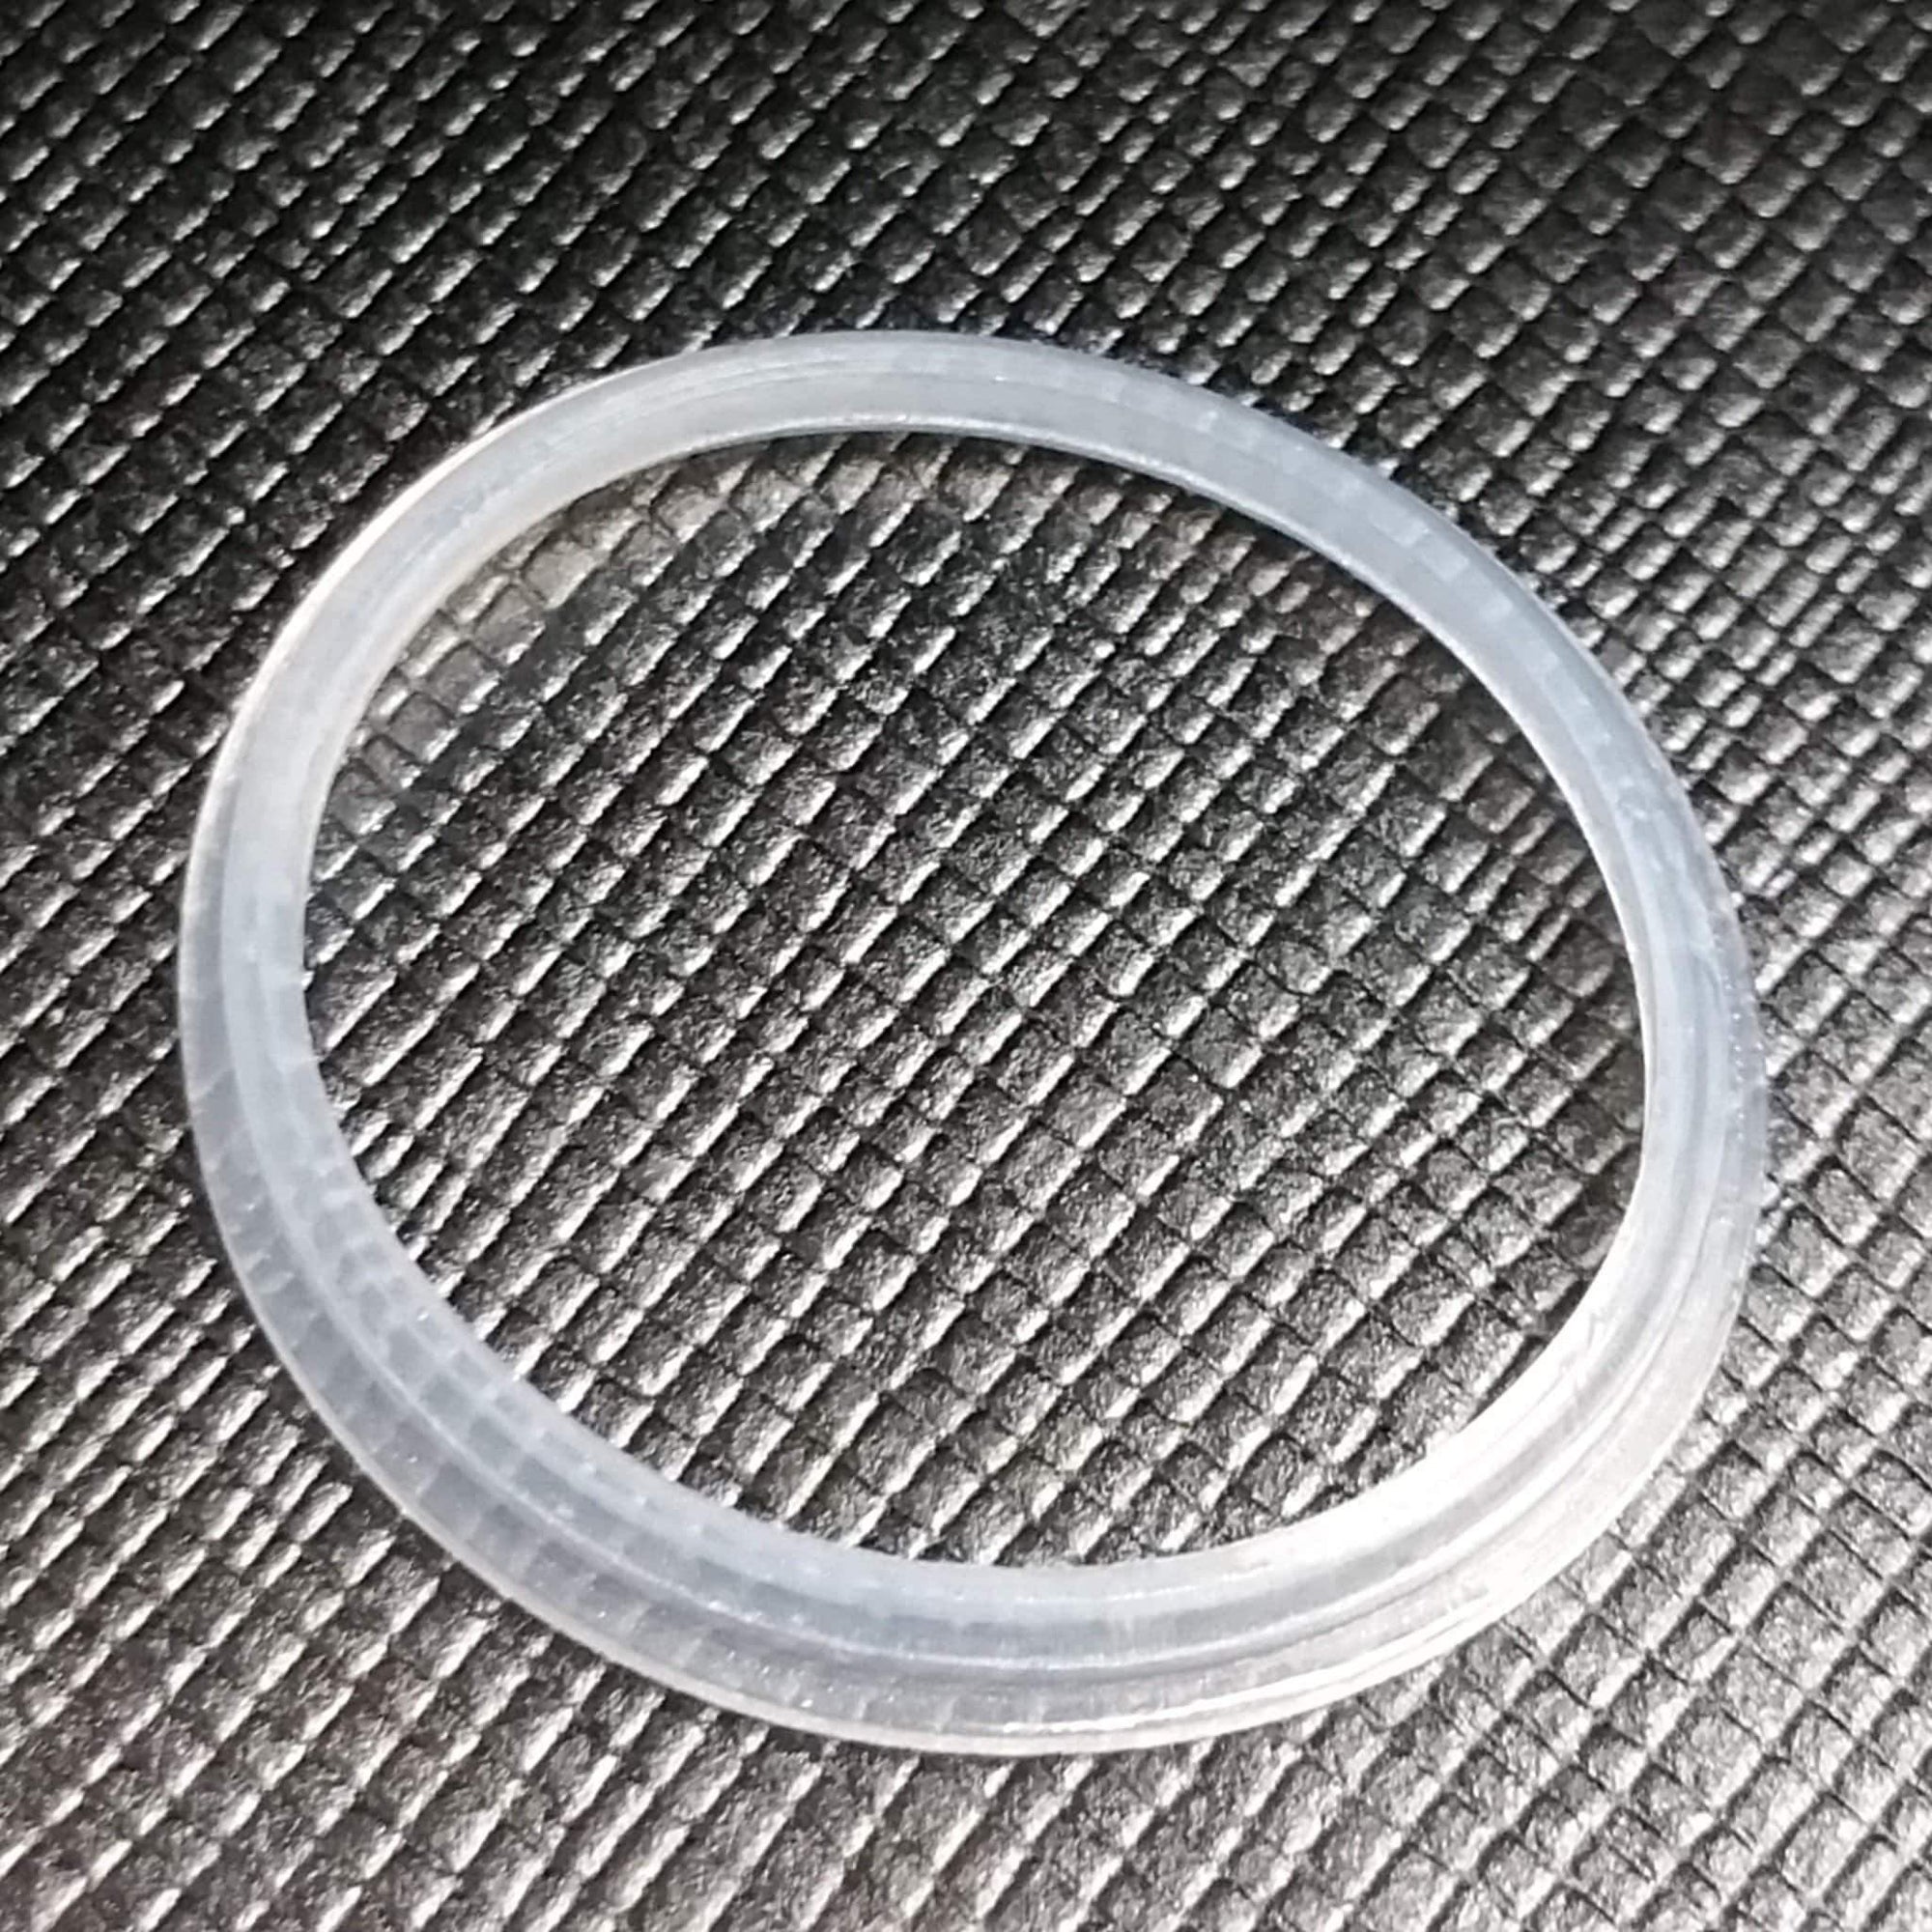 https://cdn.shopify.com/s/files/1/0691/5799/products/tfv4-plus-replacement-seals-bottom-seal-seals-oring-s-13276071690379_2000x.jpg?v=1615839202